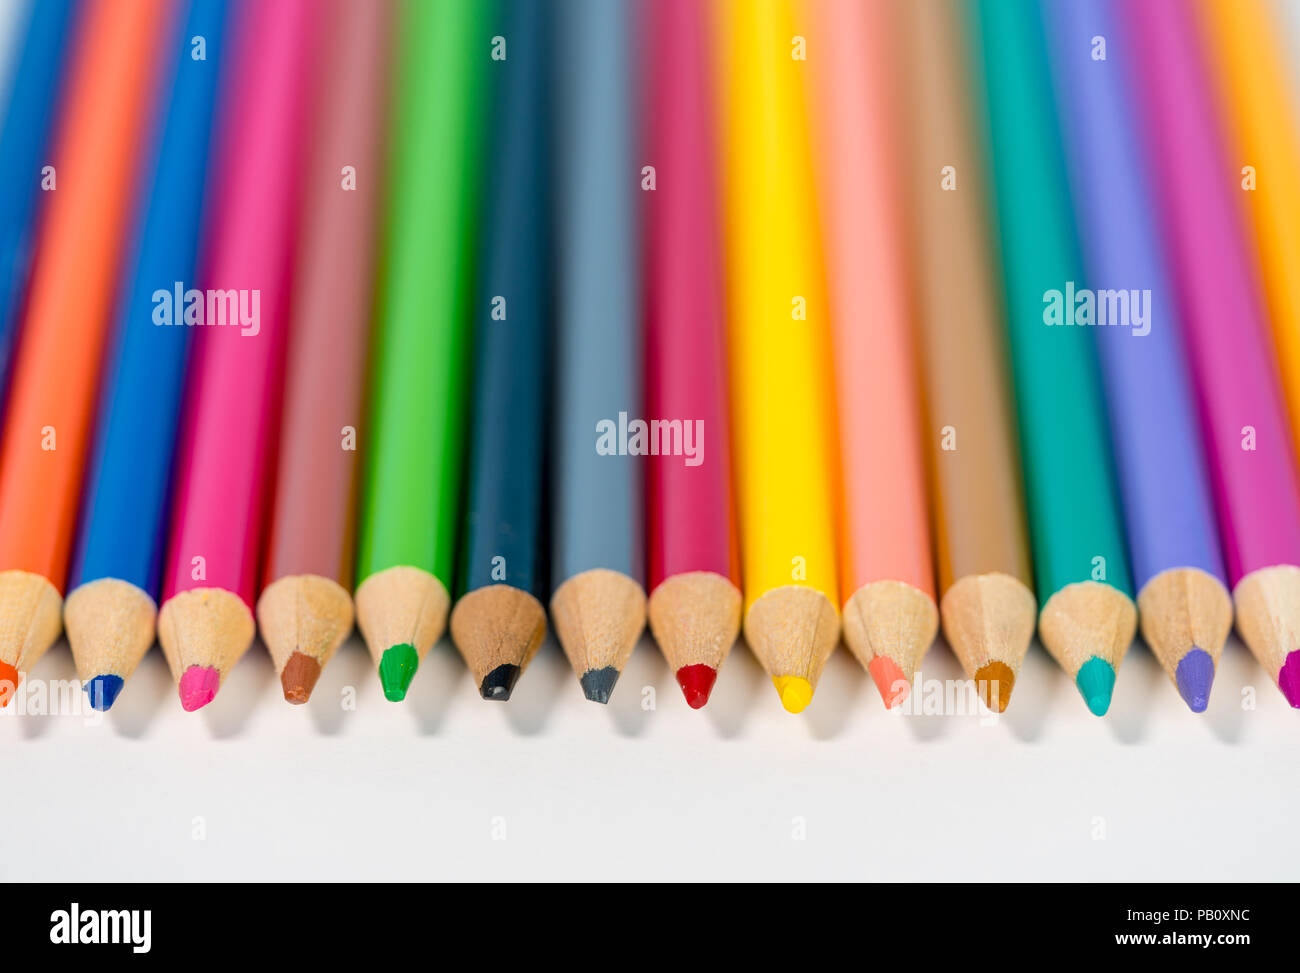 Row of white pencils #1 Photograph by Blink Images - Pixels